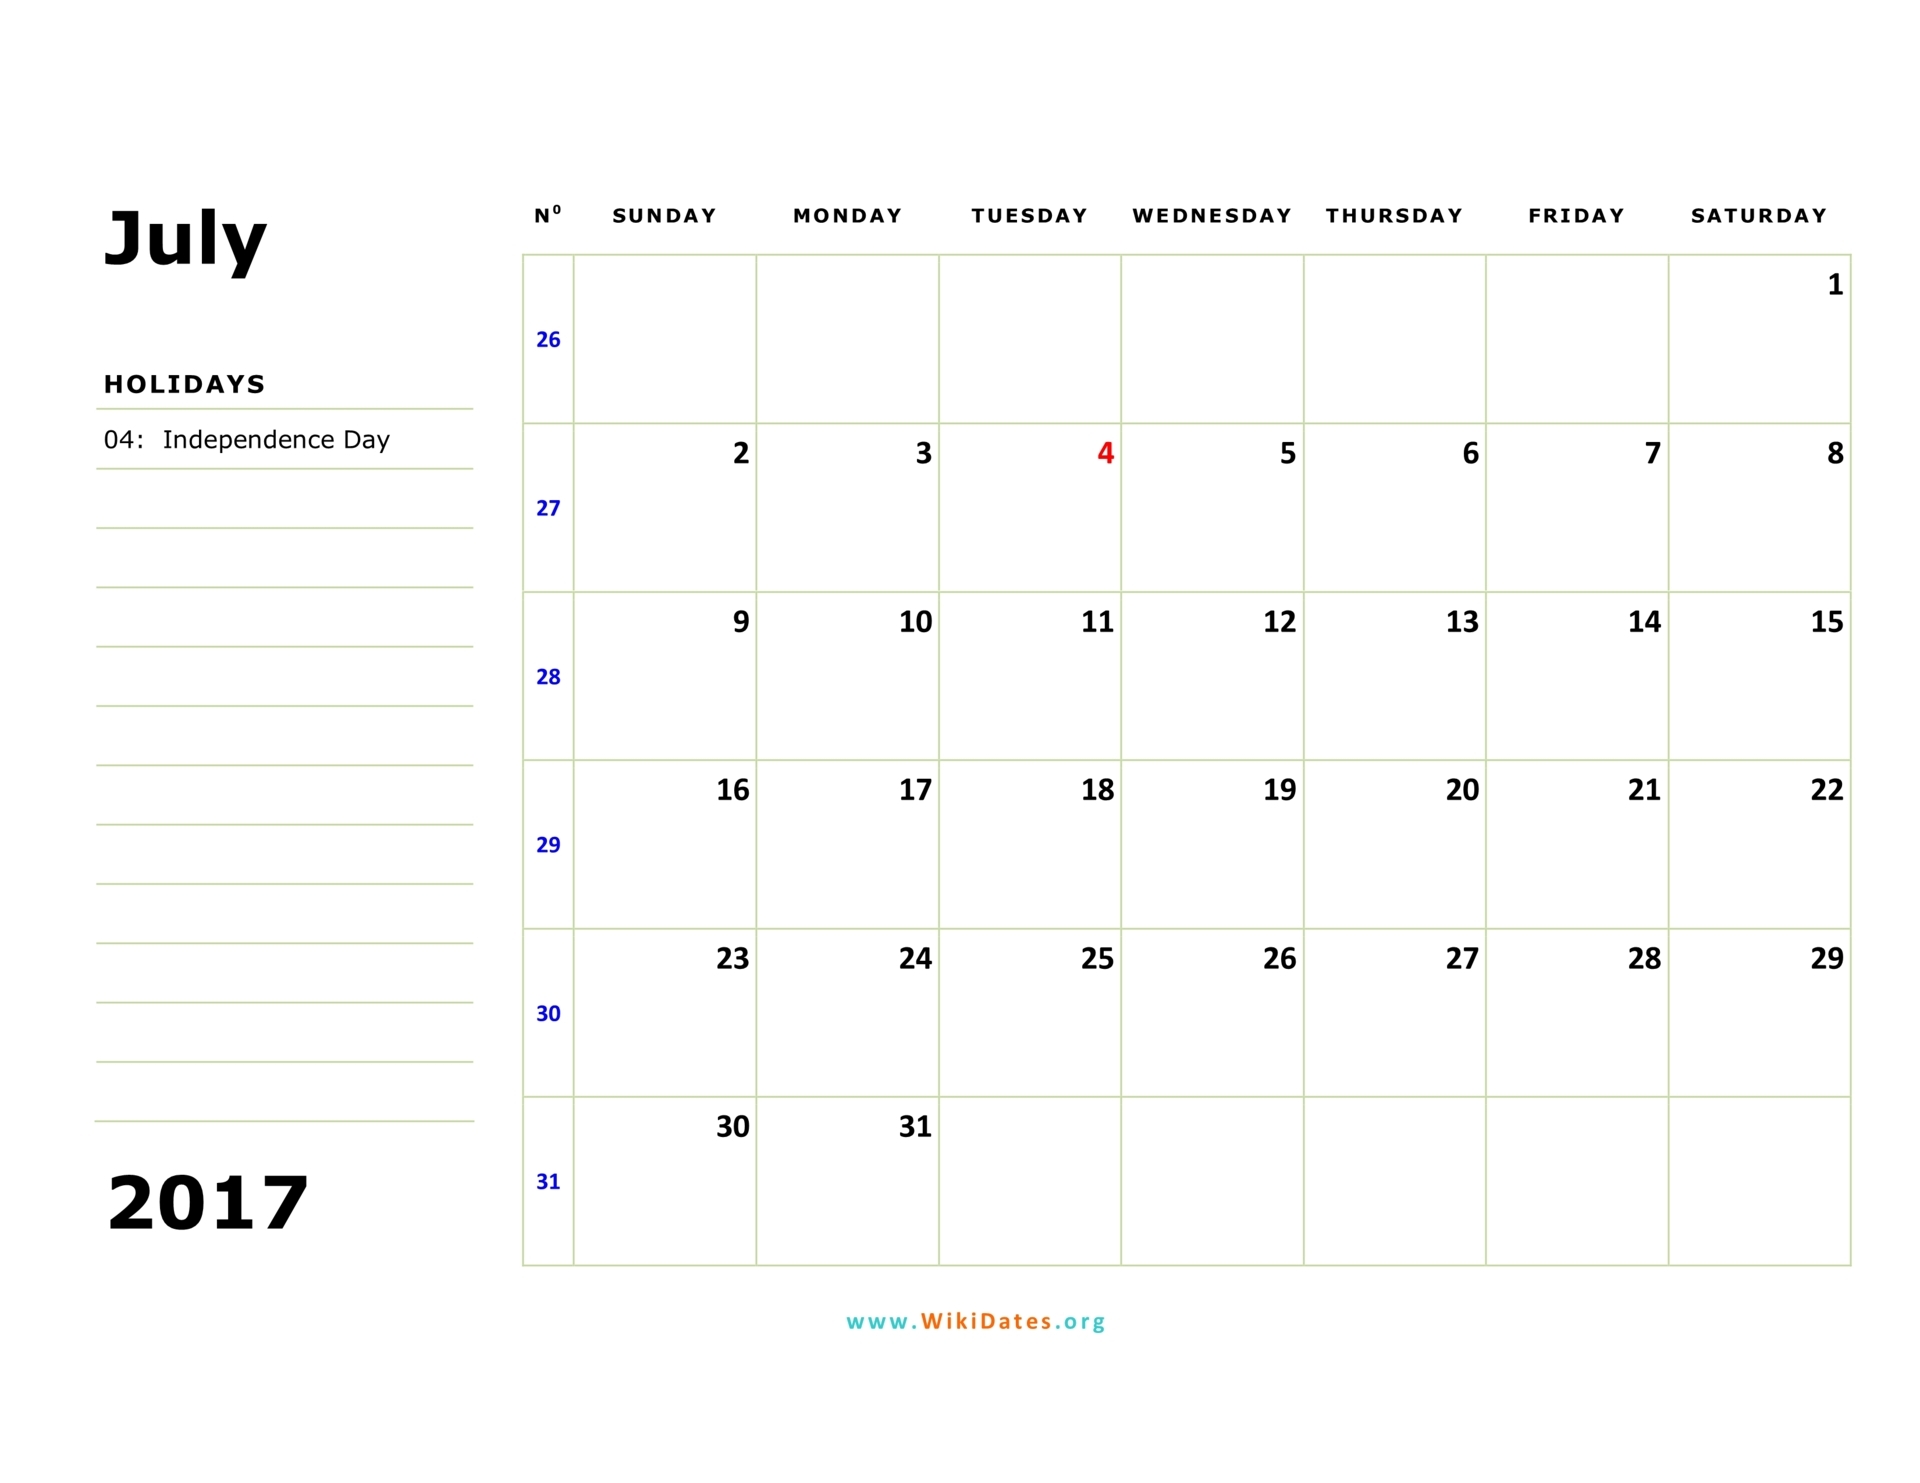 2018-printable-calendars-posters-images-wallpapers-free-download-free